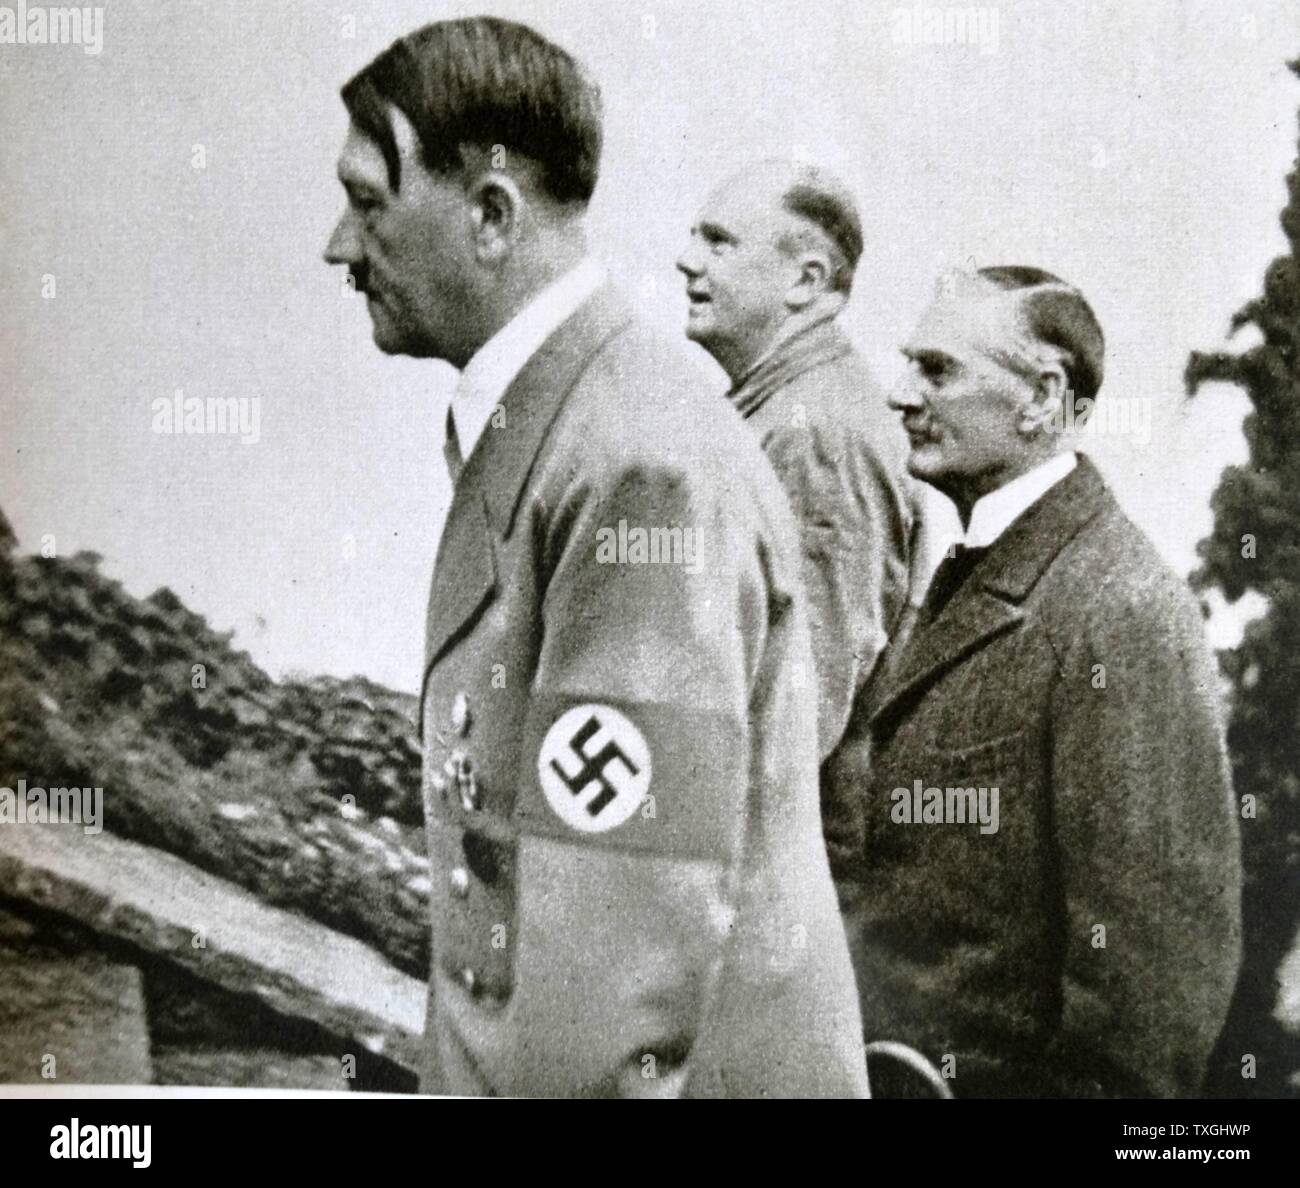 Photographic print of Adolf Hitler (1889-1945) a German politician who was the leader of the Nazi Party, Chancellor of Germany, and Führer of Nazi Germany, Joachim von Ribbentrop (1893-1946) a Foreign Minister of Nazi Germany, and Neville Chamberlain (1869-1940) a British Conservative politician and Prime Minister of the United Kingdom. Dated 20th Century Stock Photo